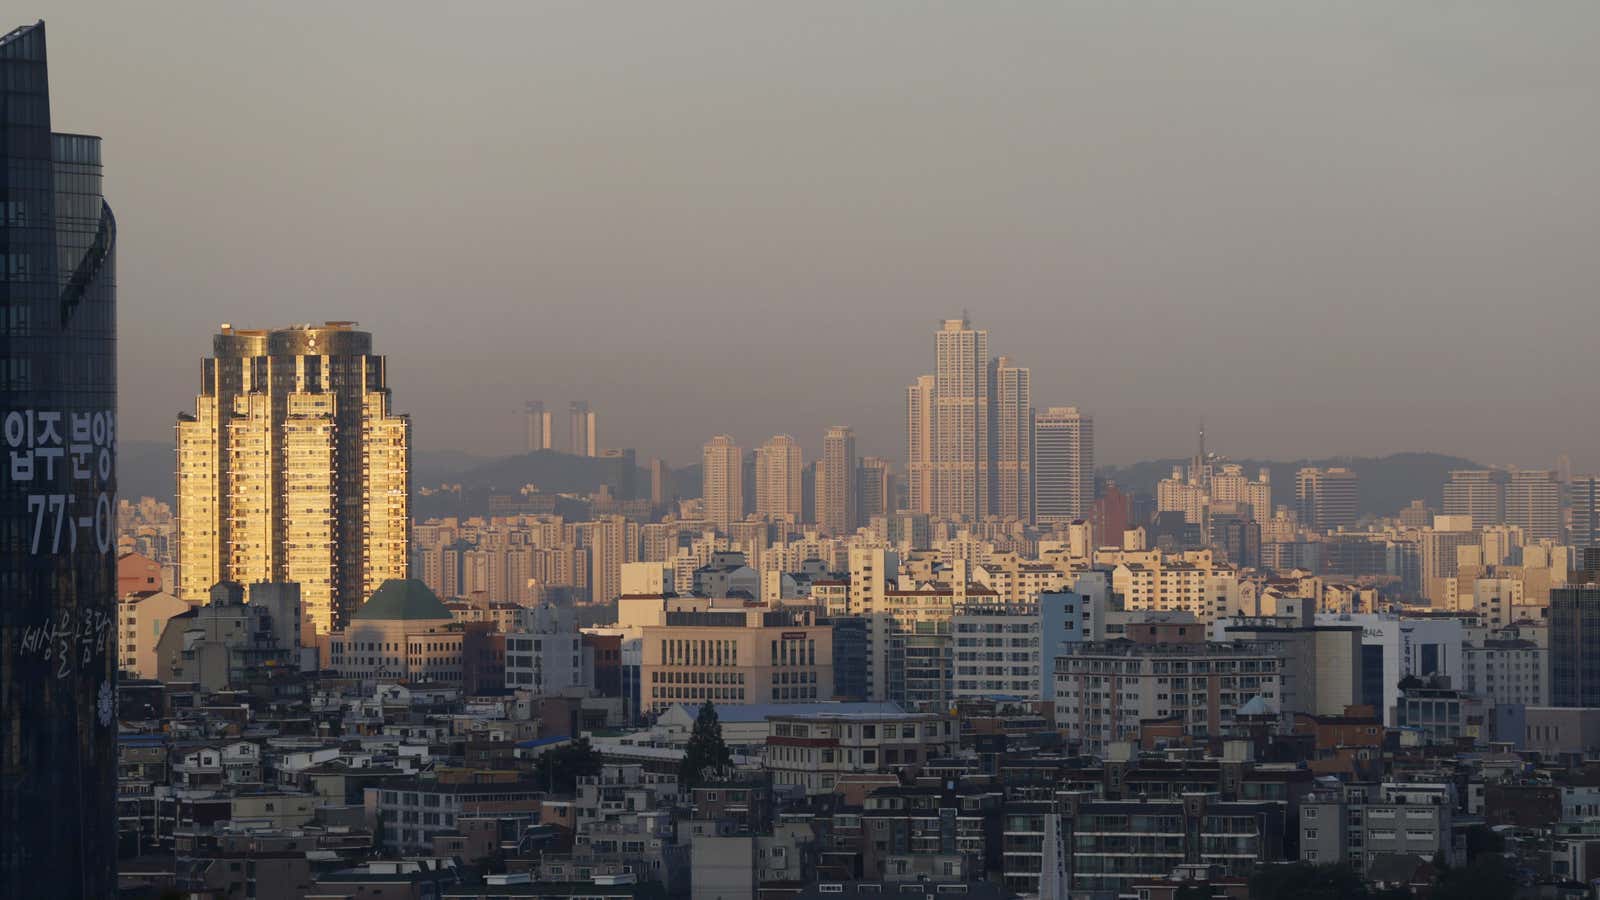 The city of Seoul…but virtual?